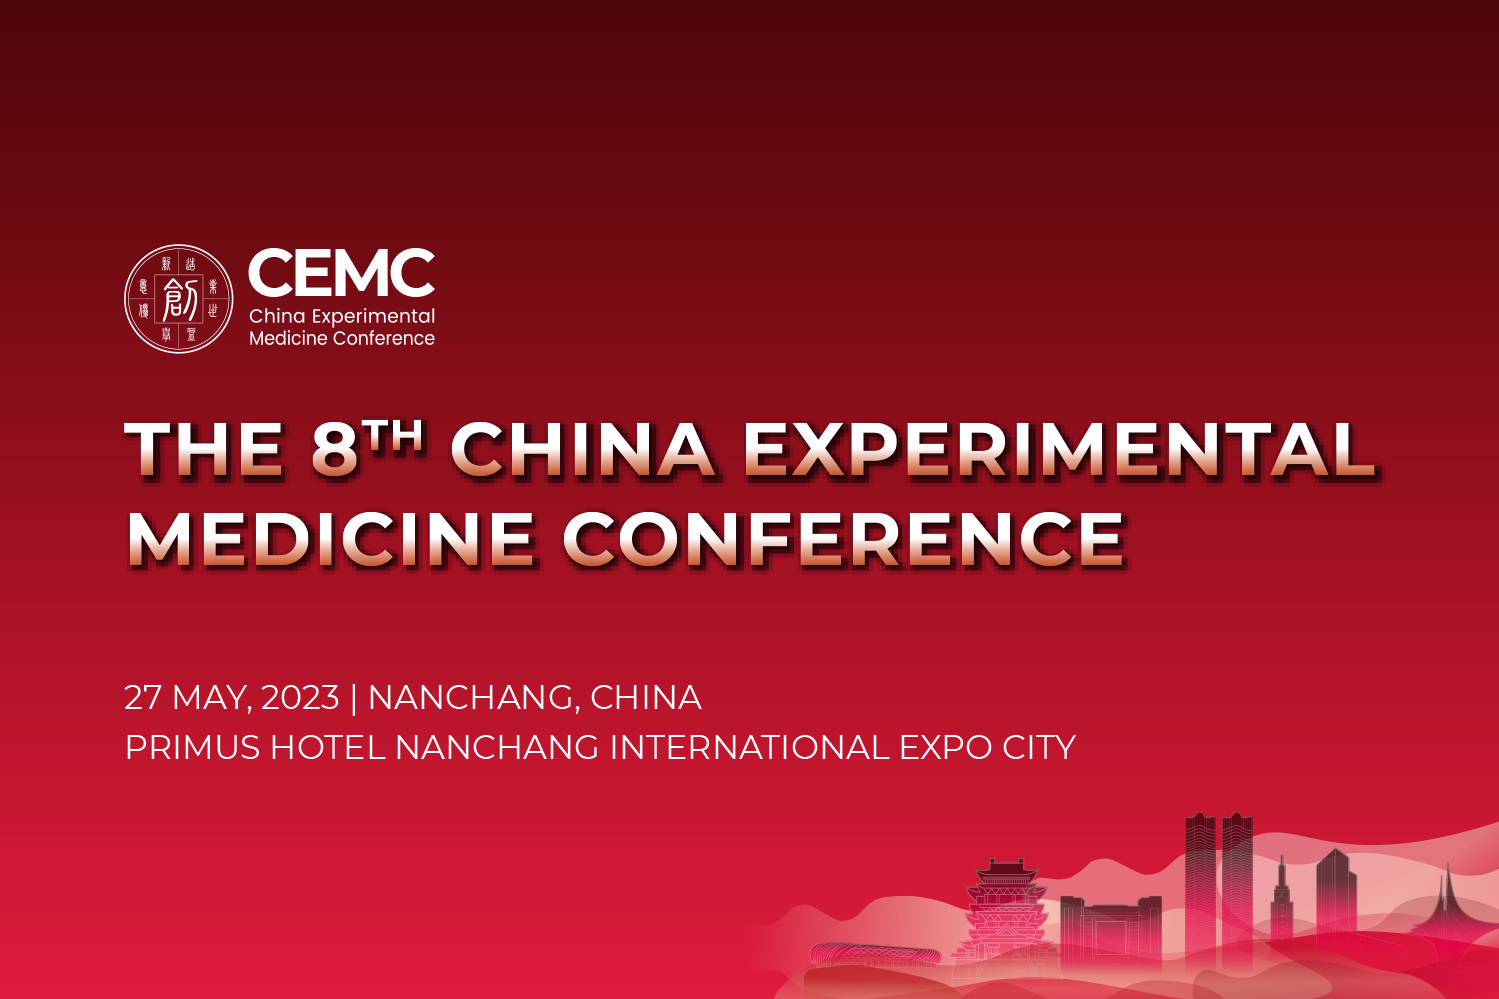 The 8th China Experimental Medicine Conference is scheduled on 27 May